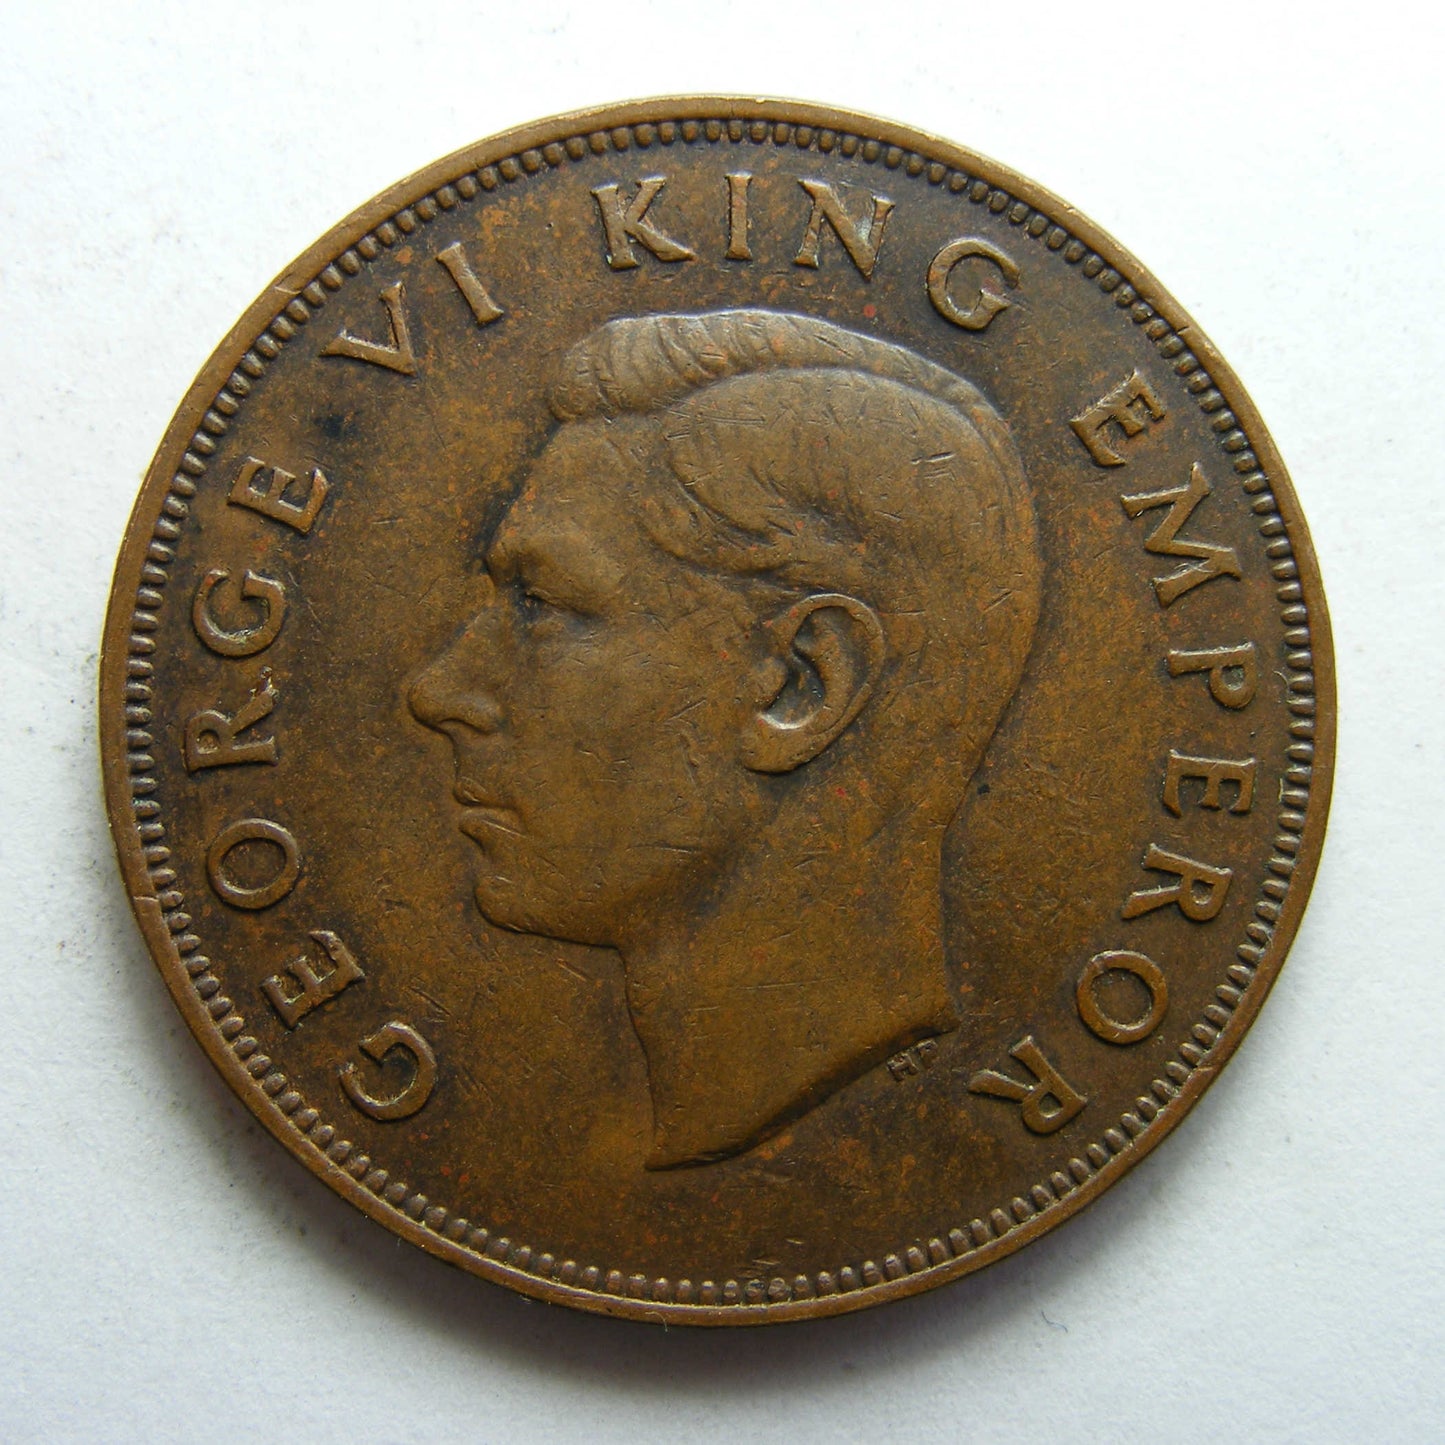 New Zealand 1941 Penny King George VI Coin